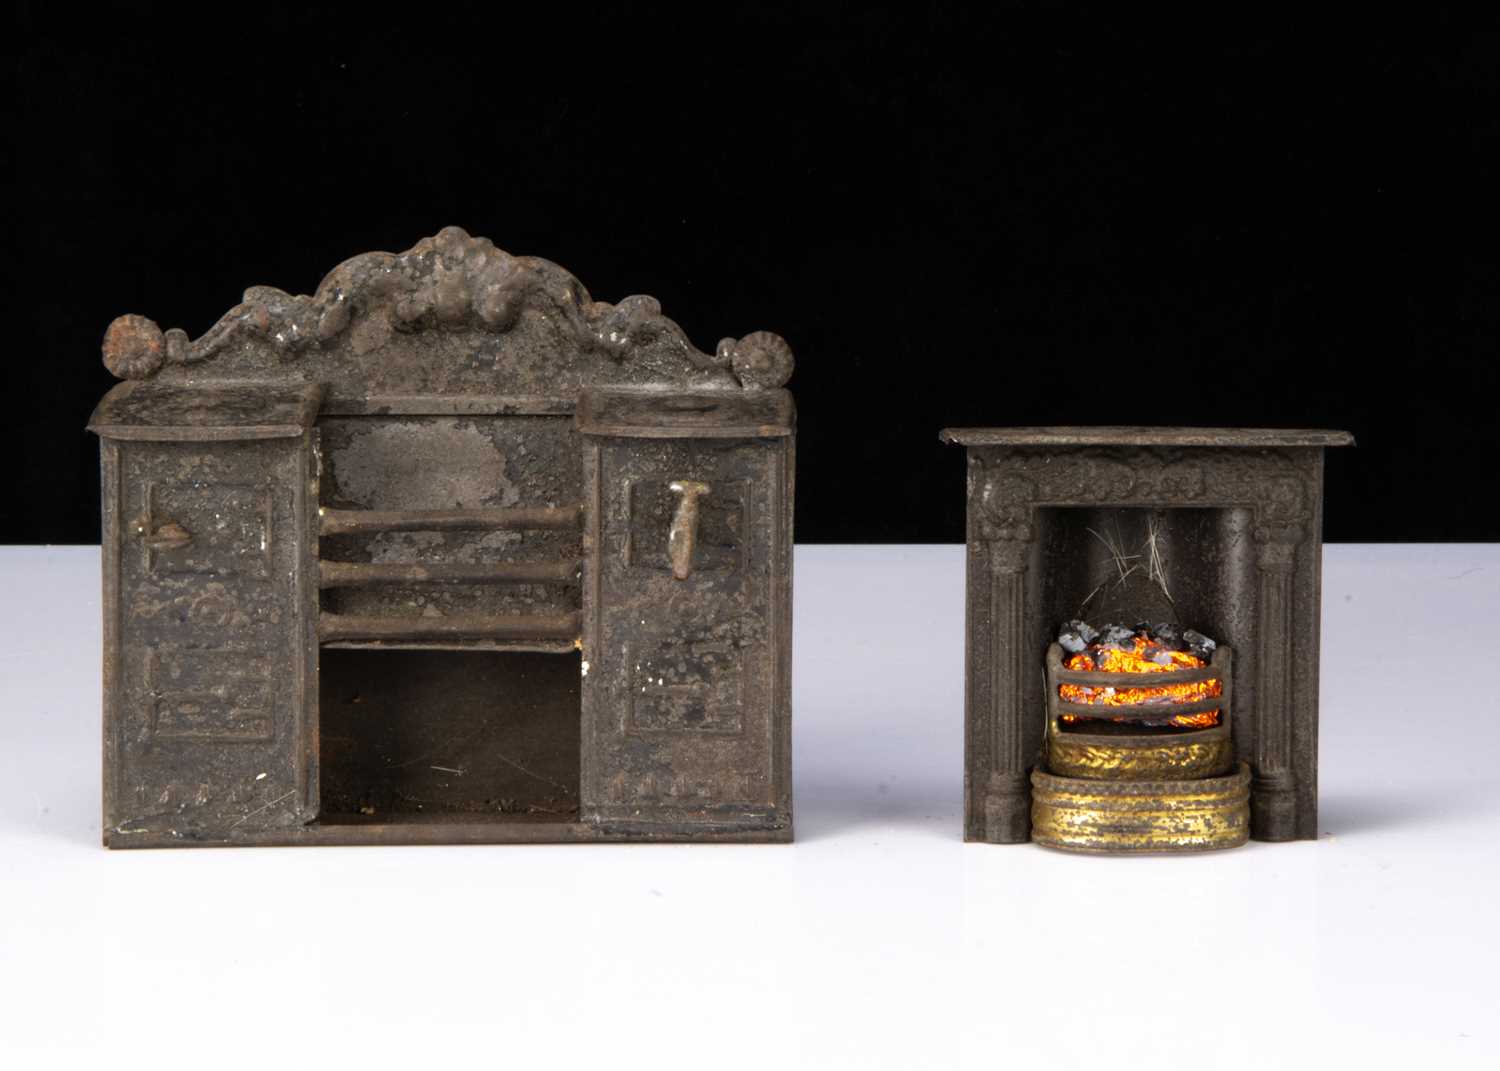 An Evans & Cartwright tinplate dolls’ house range and fireplace,